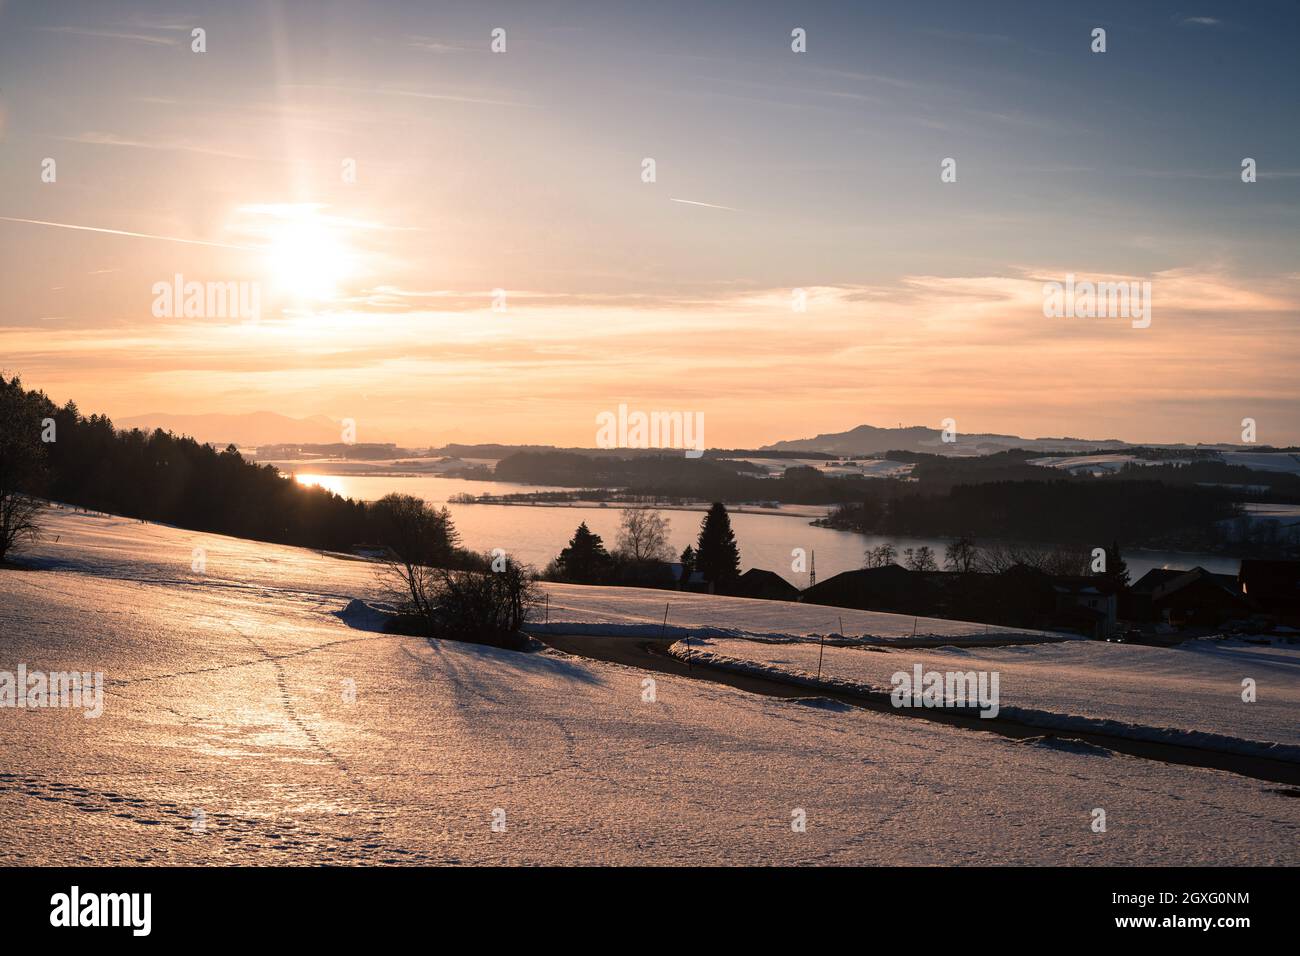 Lake, snowy fields and sundown: scenery at Wallersee, Austria Stock Photo